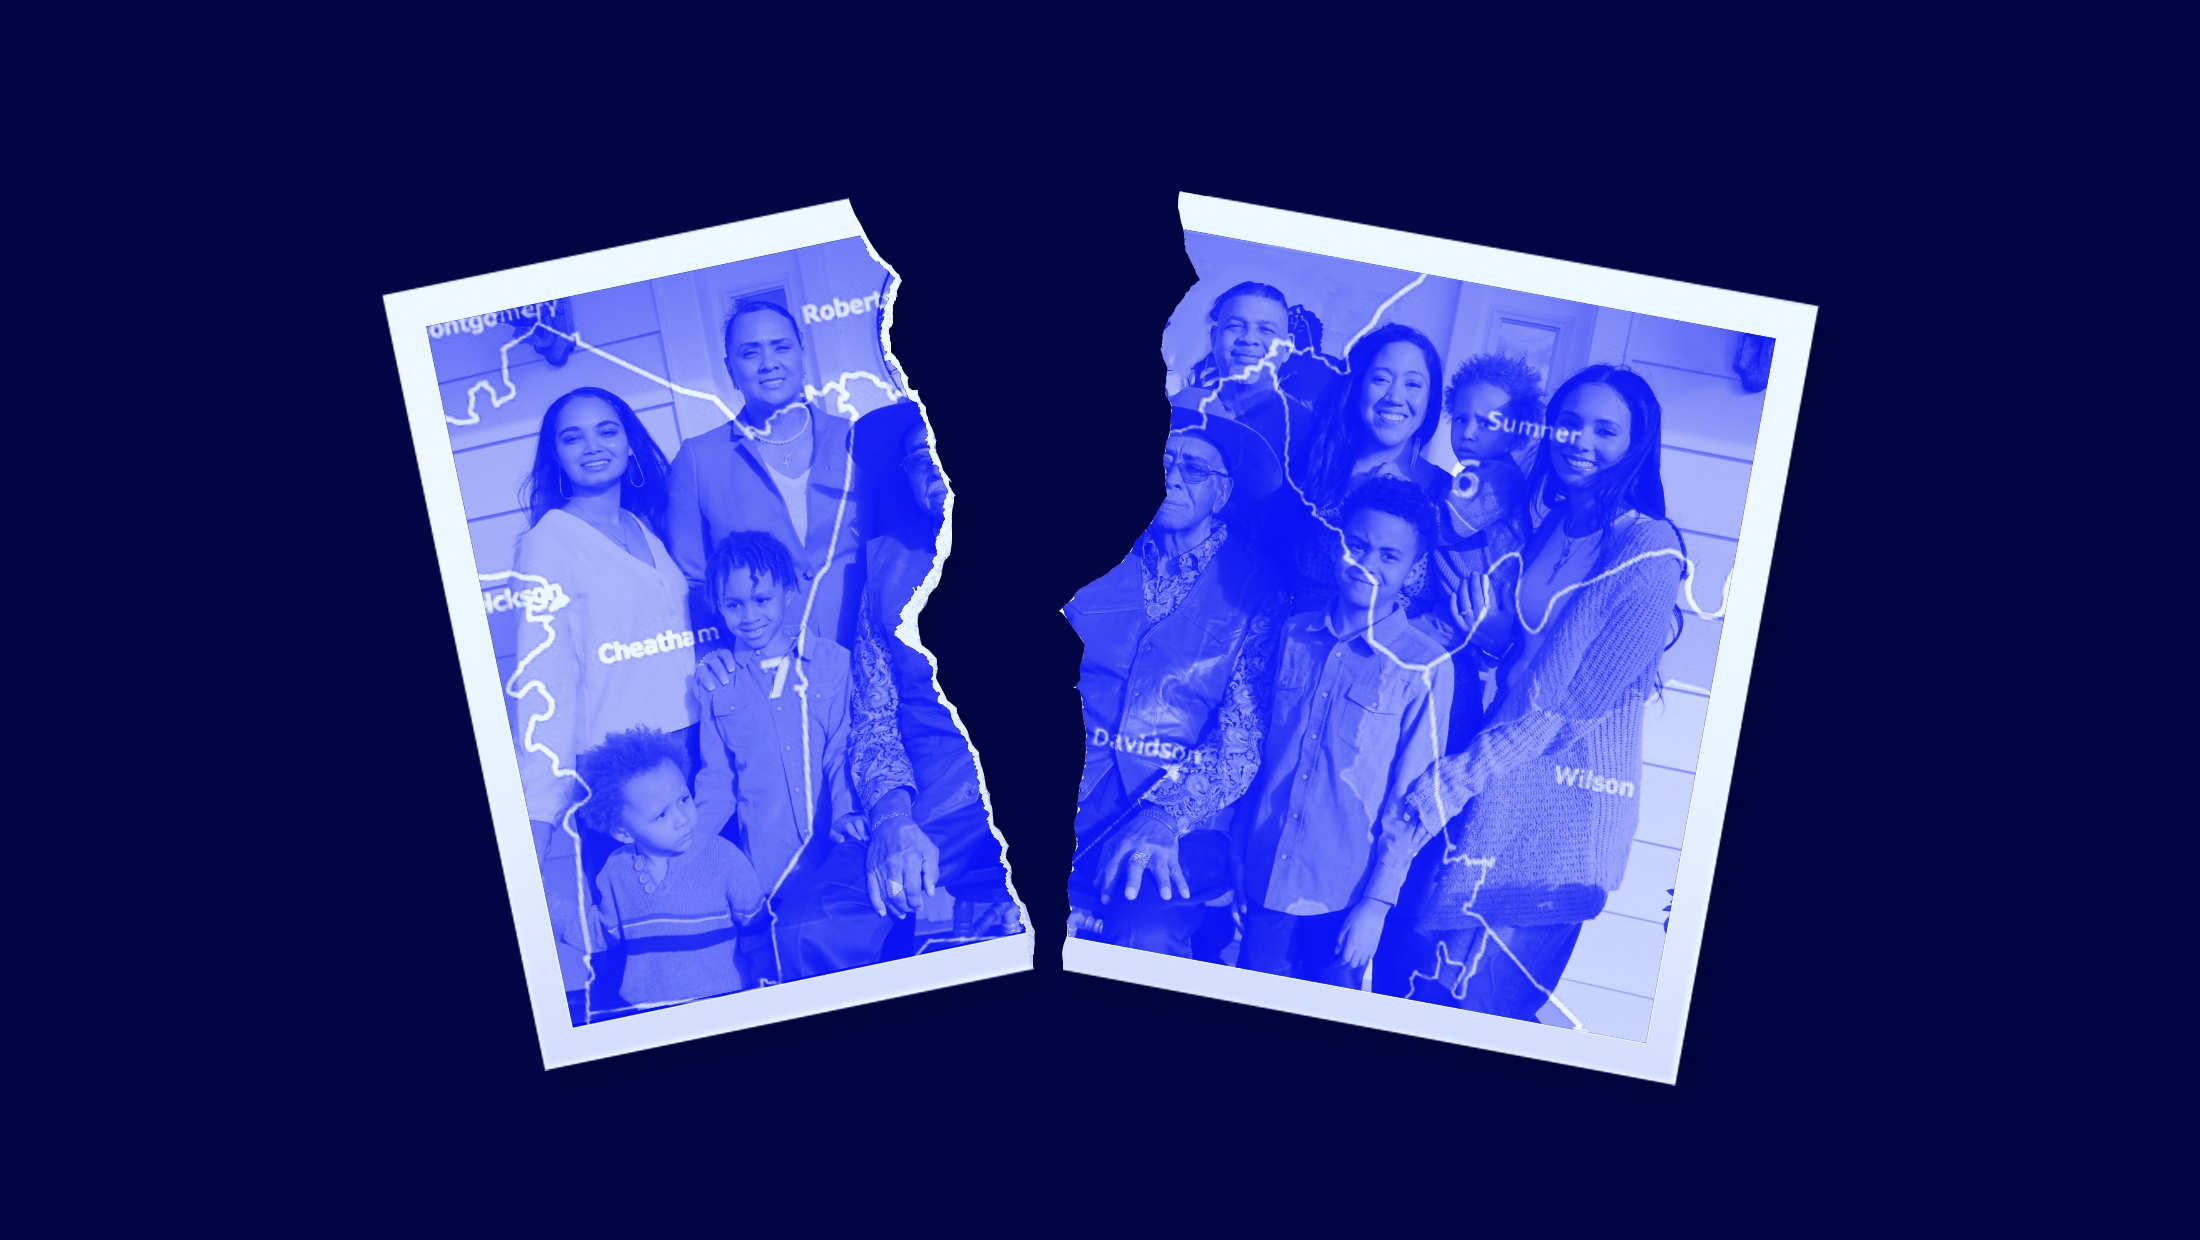 A blue-tinted photograph of a family ripped in two, with the outlines of a redistricting map superimposed on top.